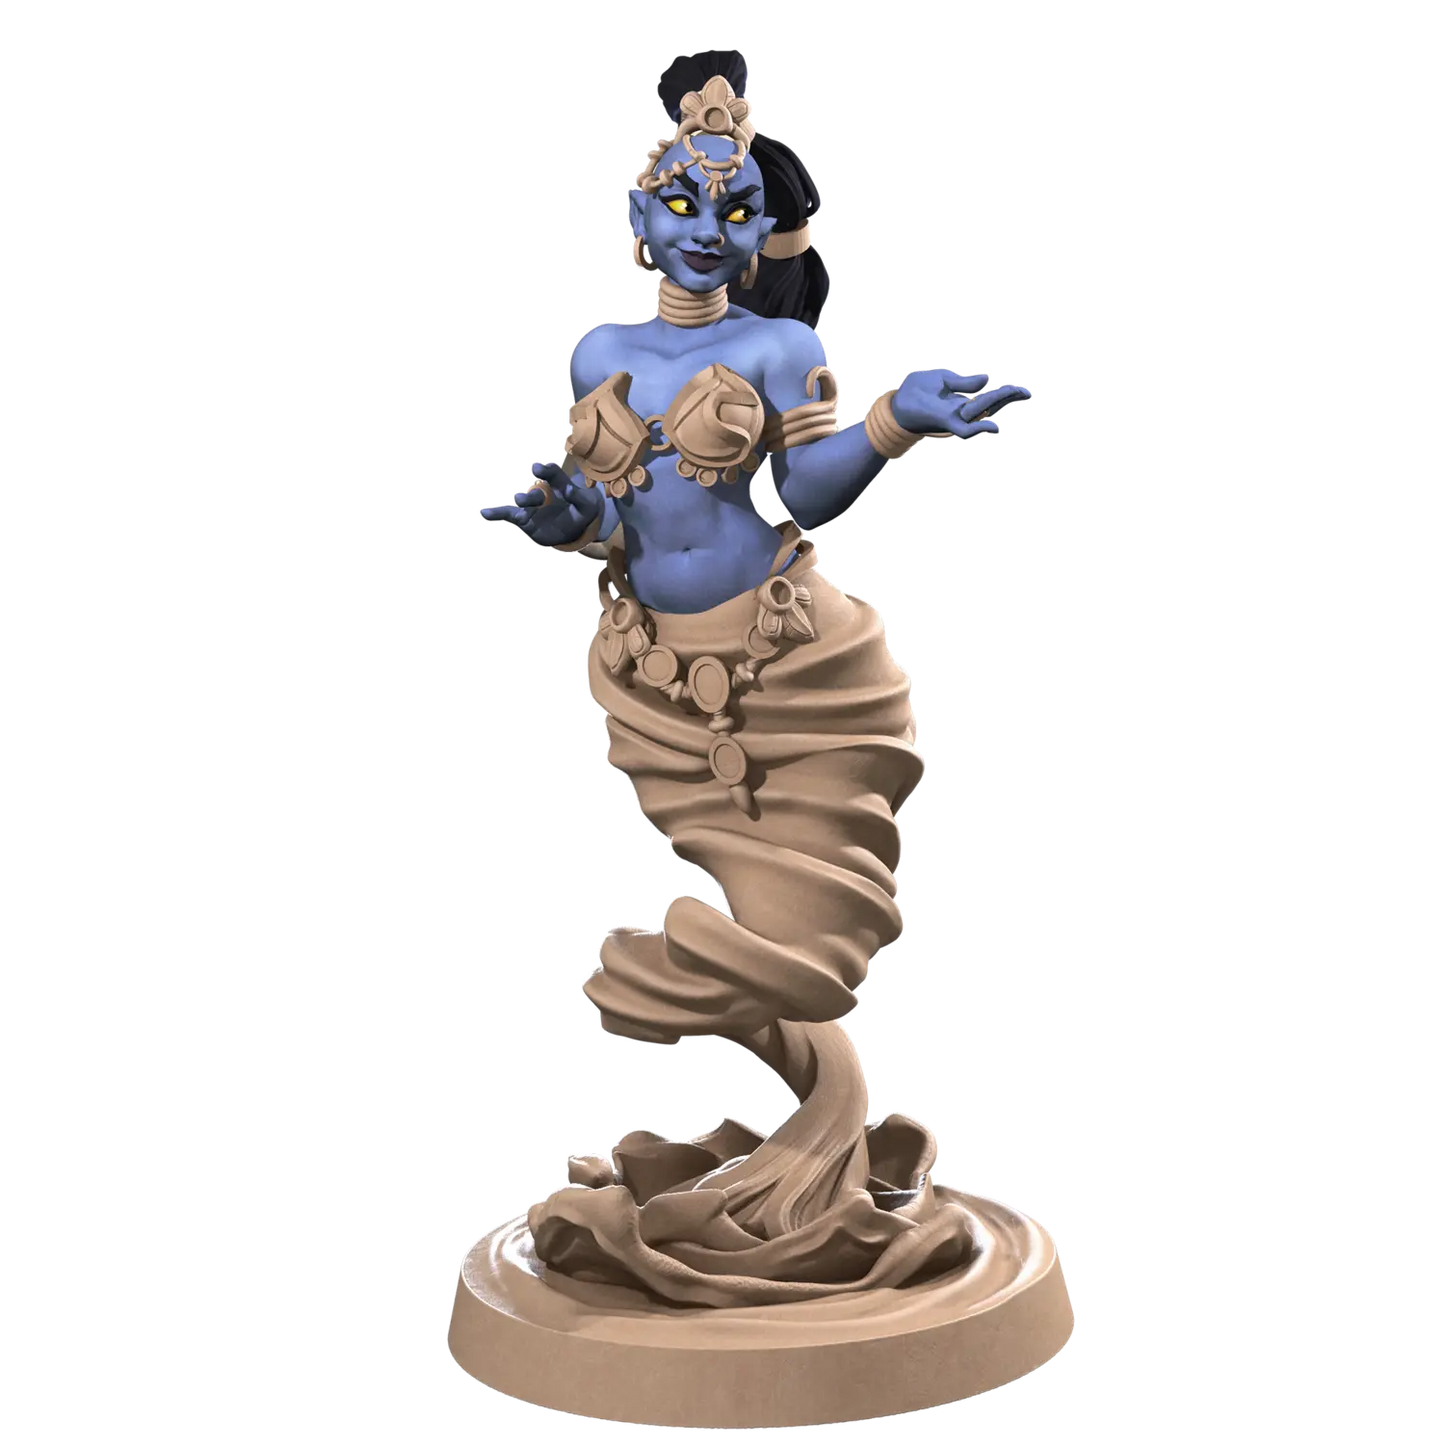 DnD Elementals - Miniature - Monsters - nsfw Jasmine, Air Djinn 02 Classic Elementals - Miniature - Monsters - nsfw sold by DoubleHitShop